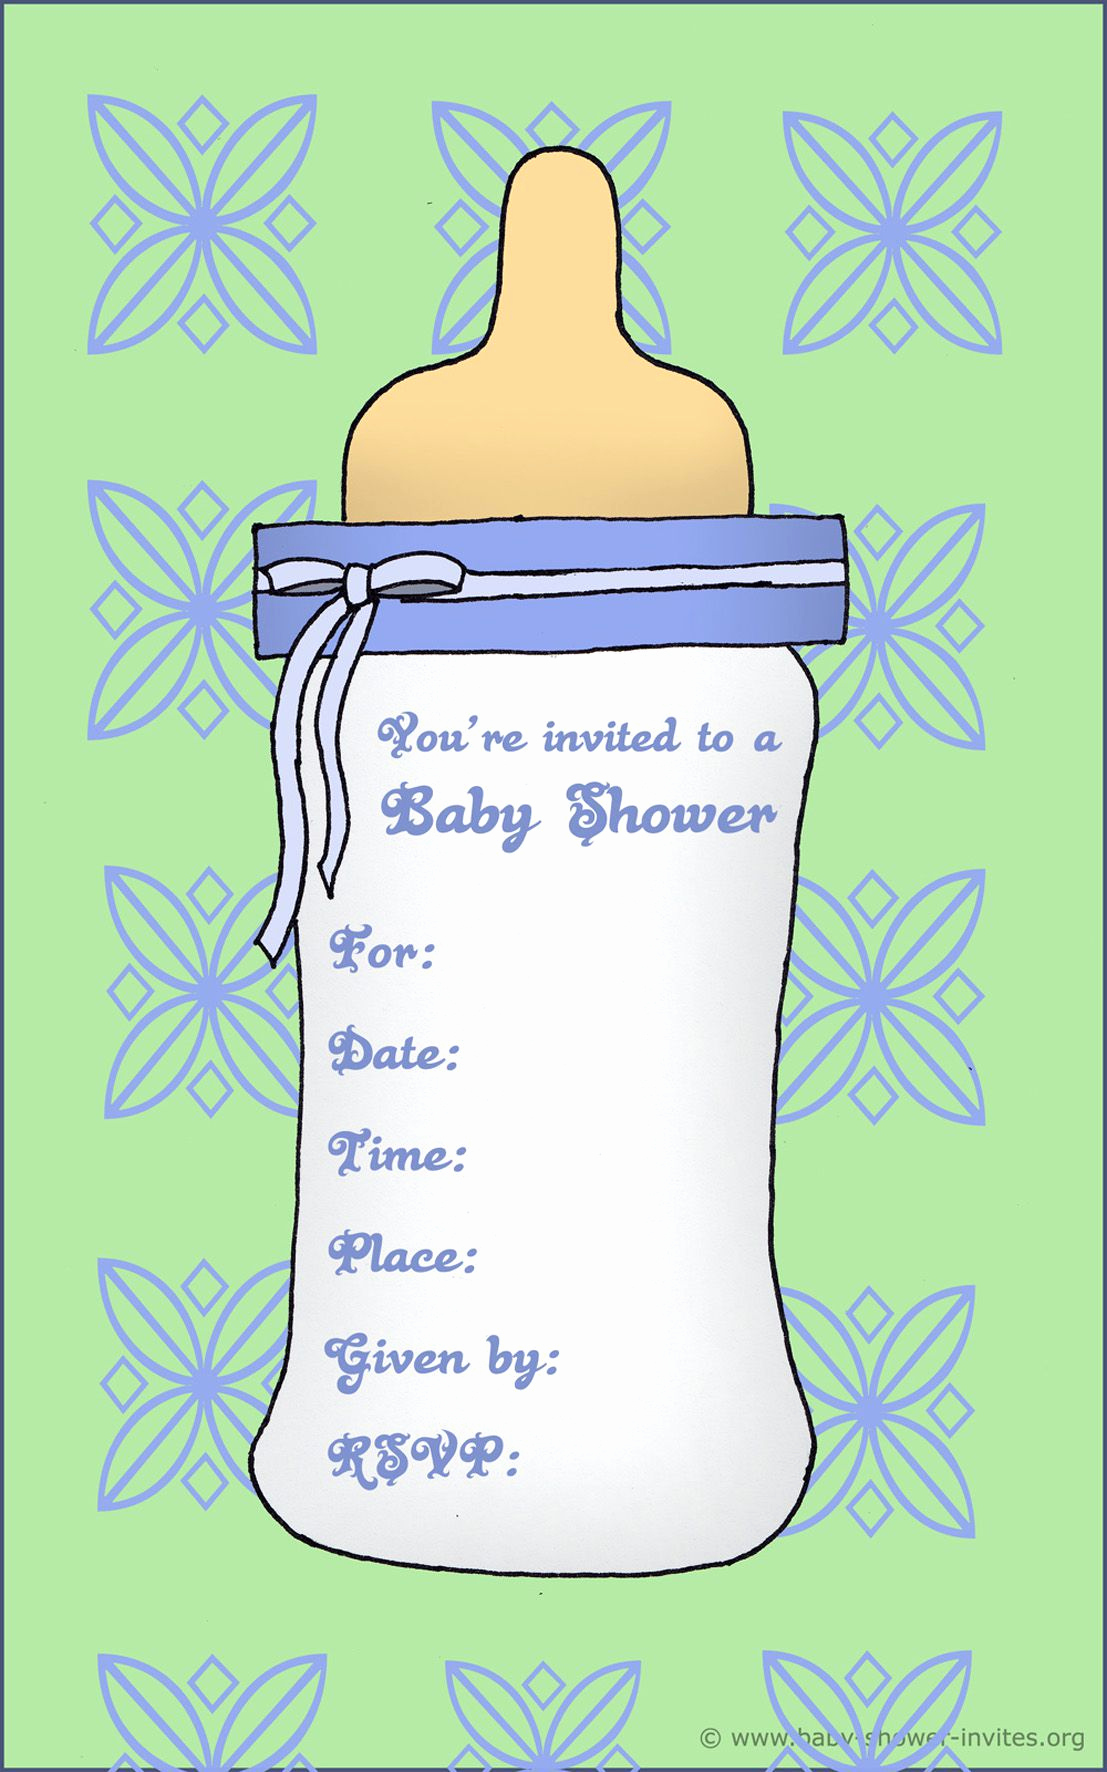 Baby Shower Invitation Template Best Of Graduation Party Free Baby Invitation Template Card